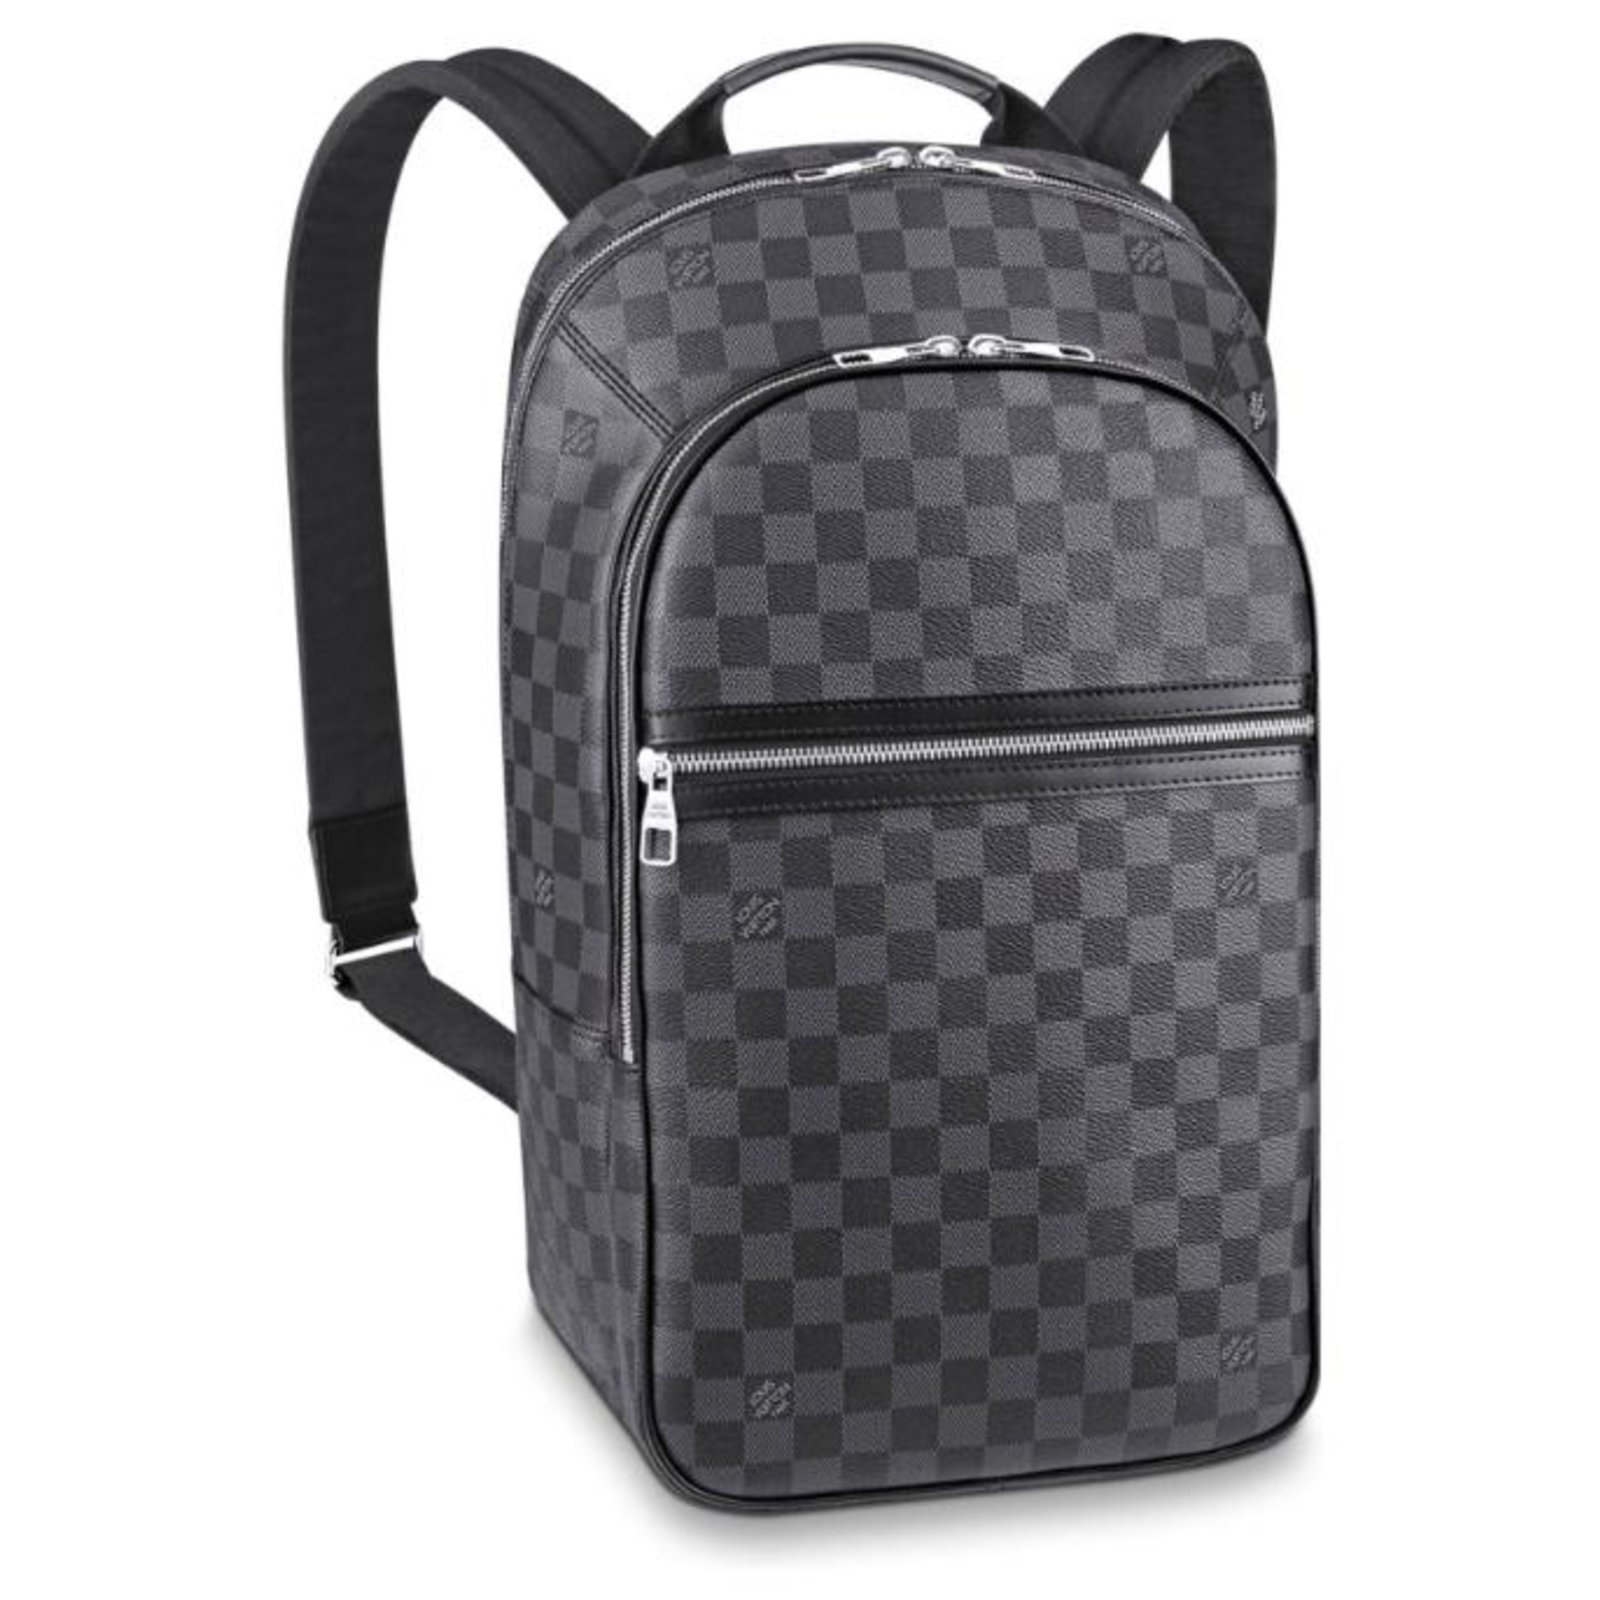 Products by Louis Vuitton: Michael  Louis vuitton, Vuitton, Louis vuitton  backpack